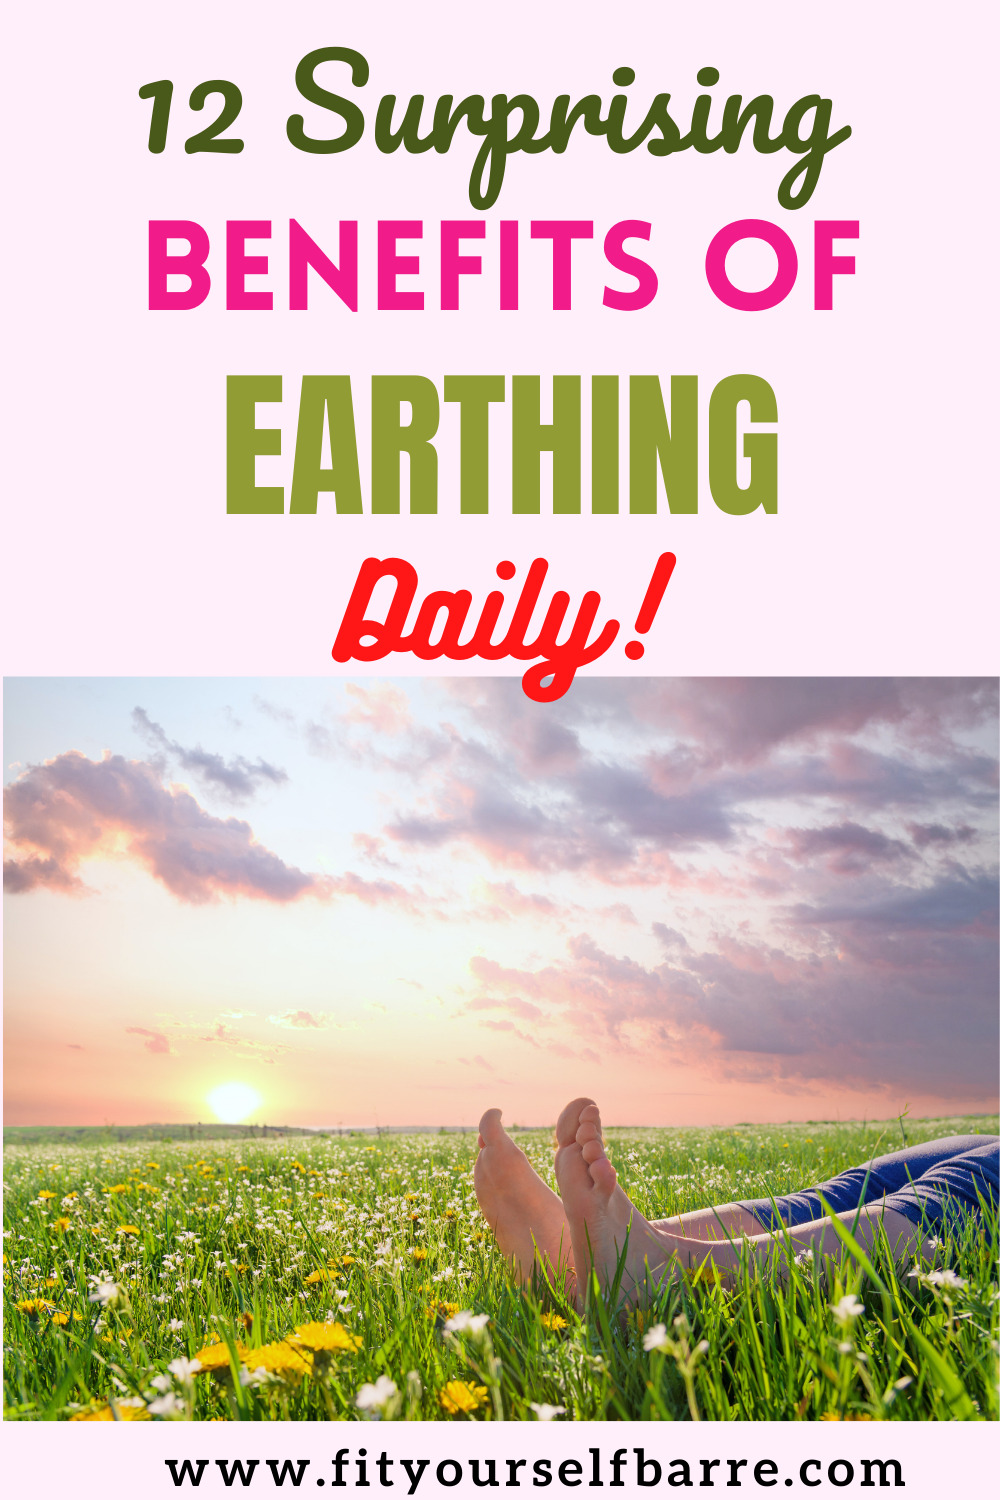 Health benefits earthing-a man lying bare feet on spring grass and bed of flowers